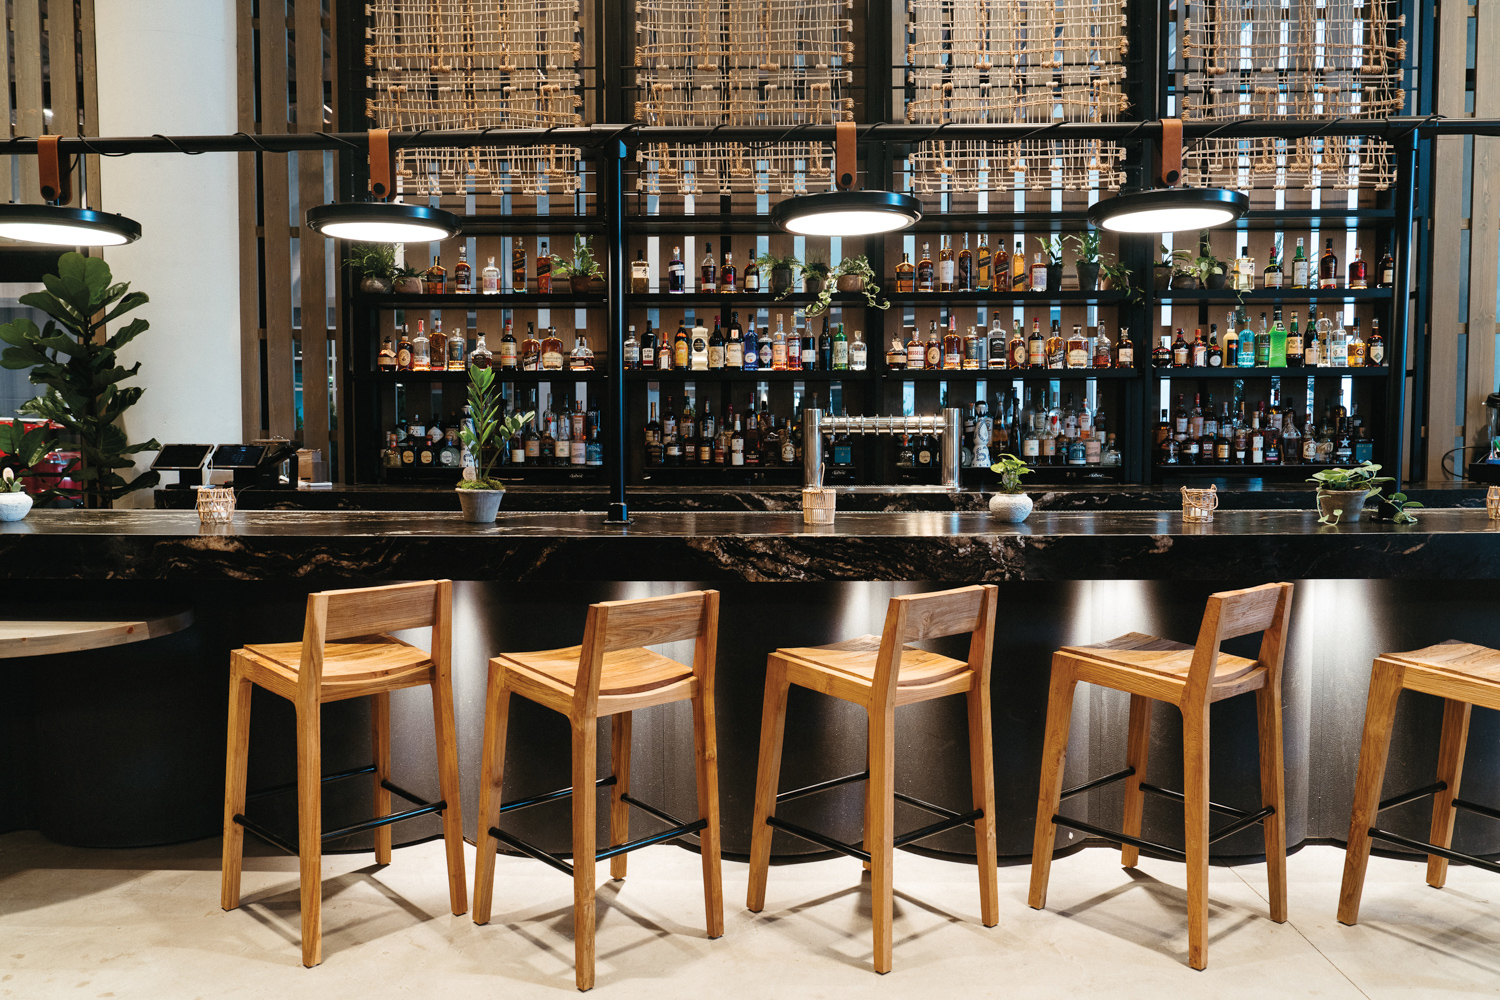 Dark marble hotel bar lined with backed wooden stools